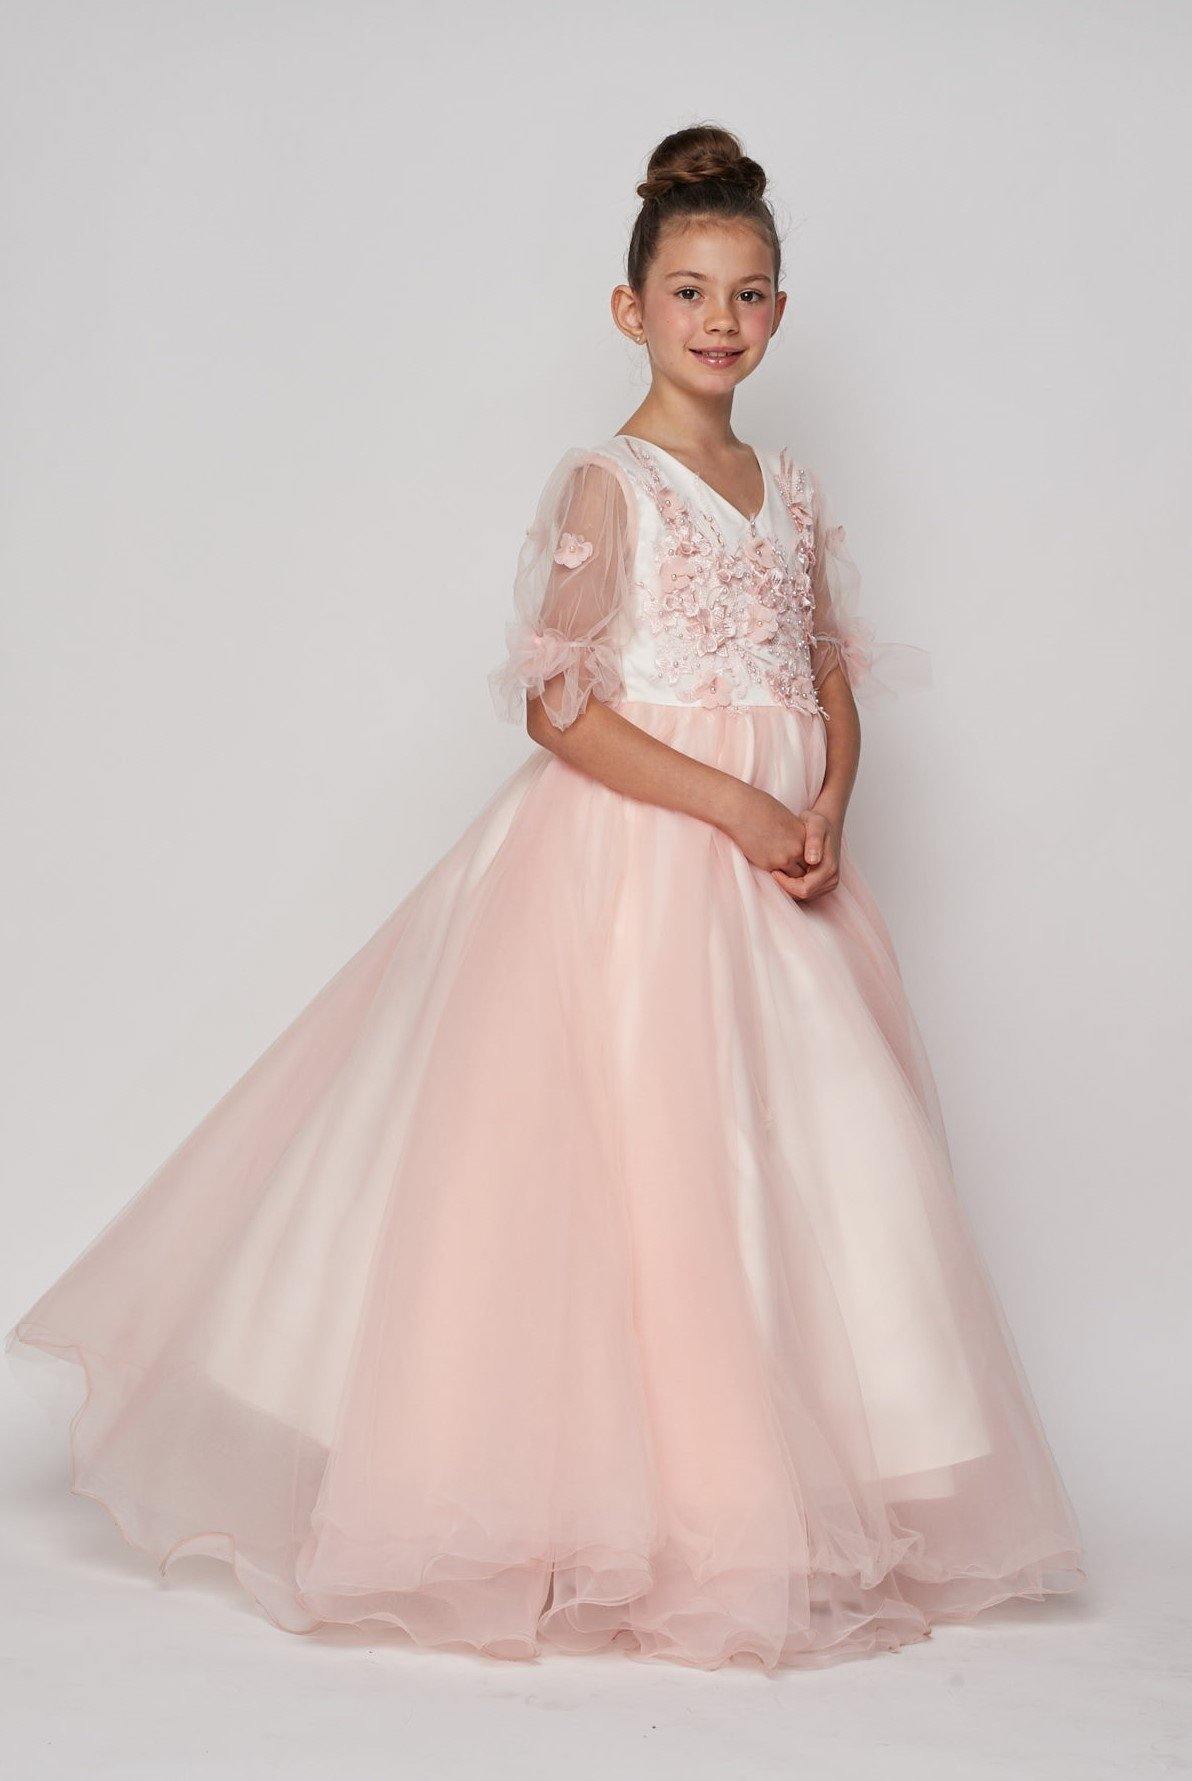 Short Sleeved Beaded Organza Gown Flower Girl - The Dress Outlet Cinderella Couture